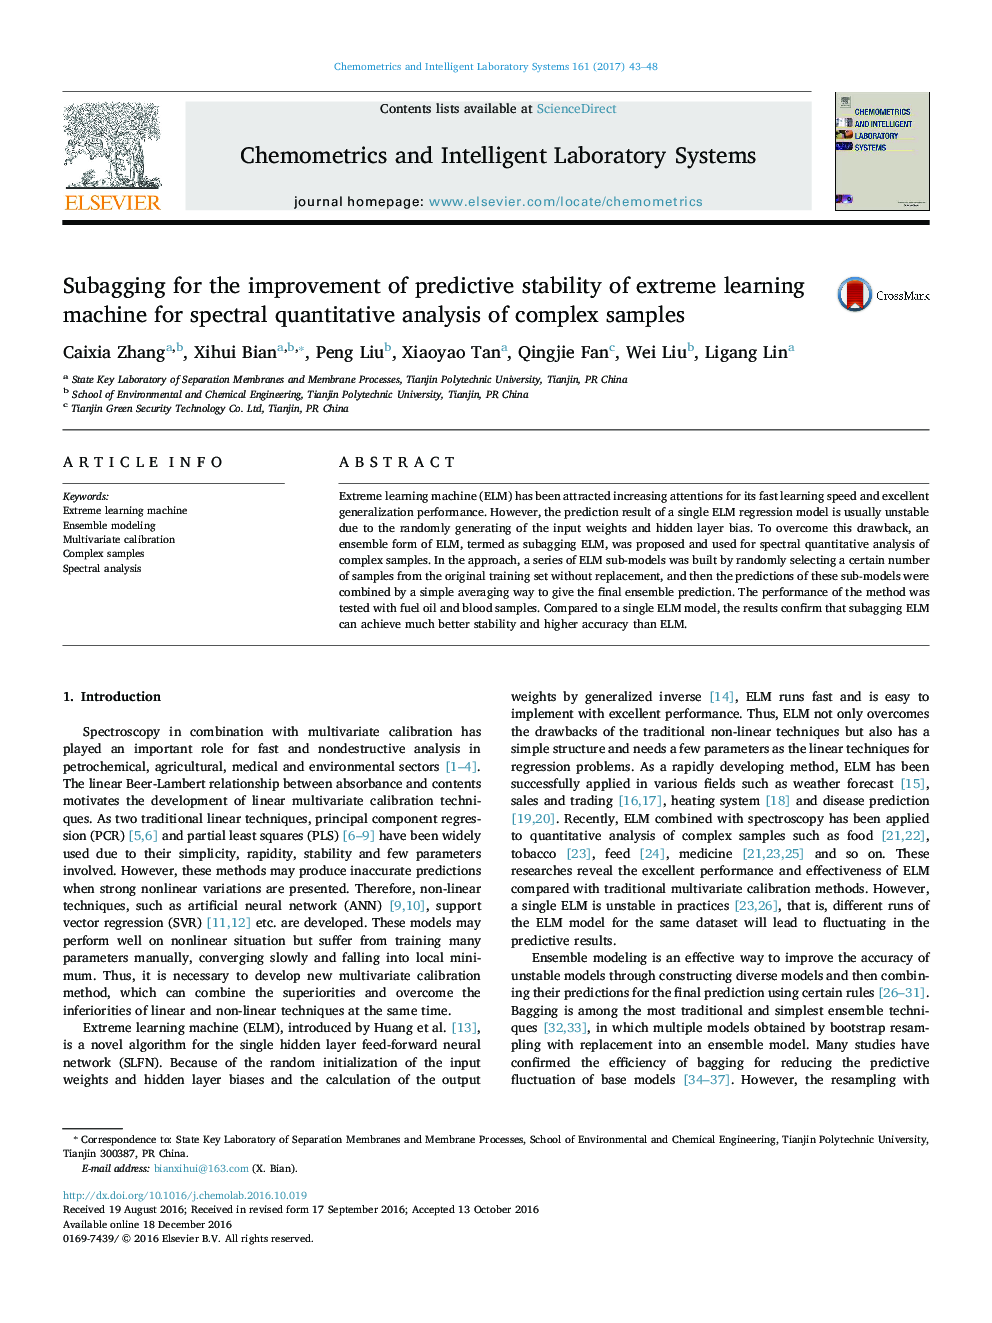 Subagging for the improvement of predictive stability of extreme learning machine for spectral quantitative analysis of complex samples